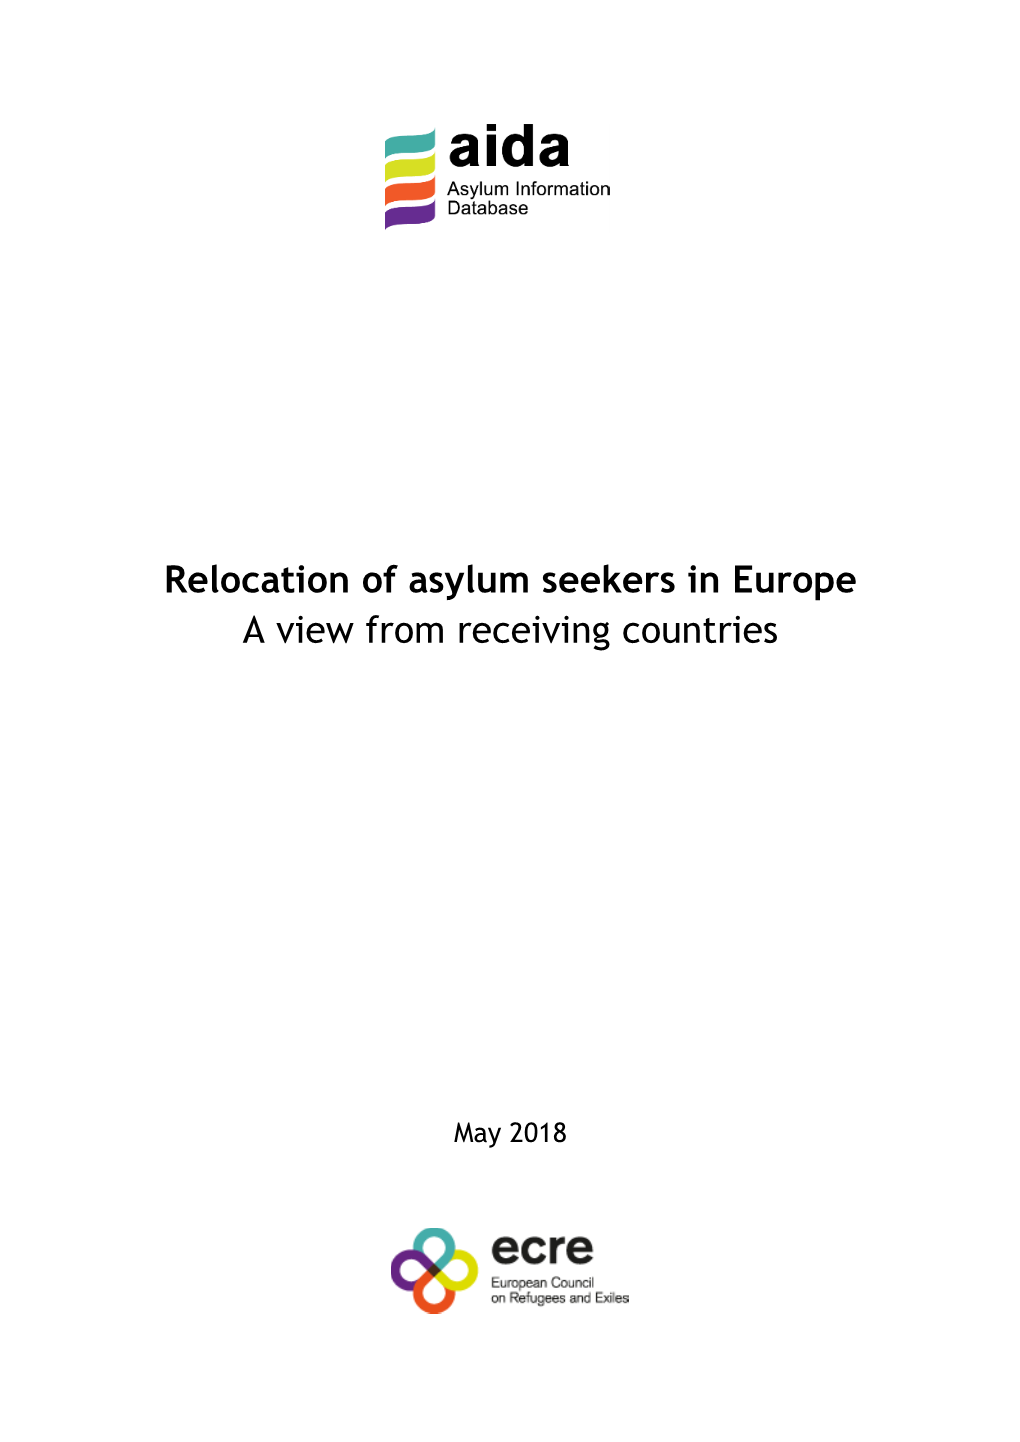 Relocation of Asylum Seekers in Europe a View from Receiving Countries